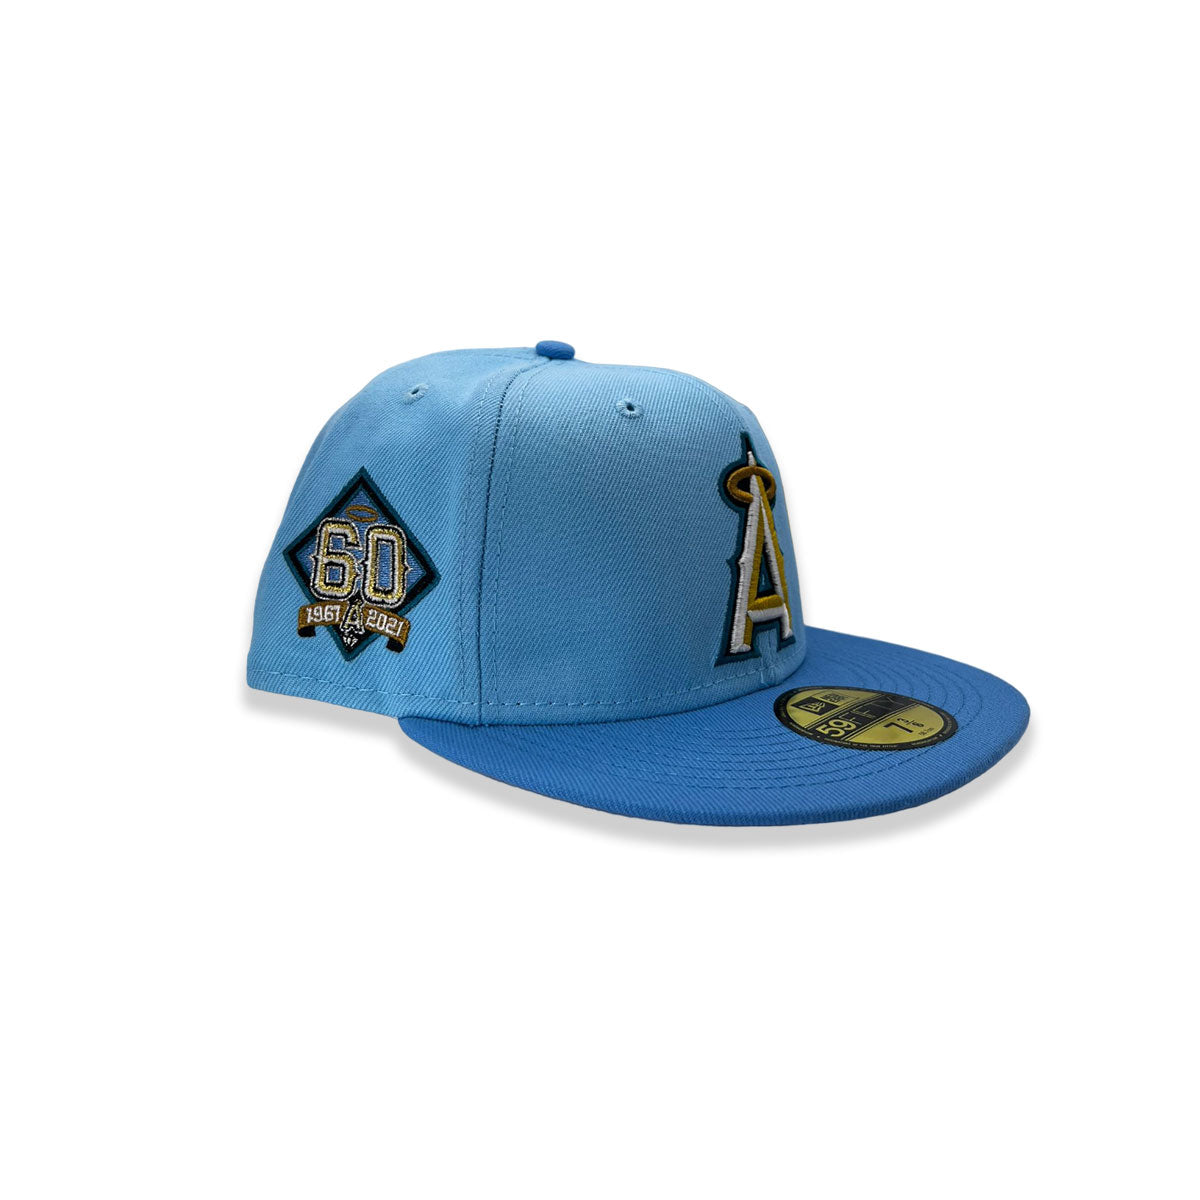 New Era Anaheim Angels 60th Anniversary Patch Fitted